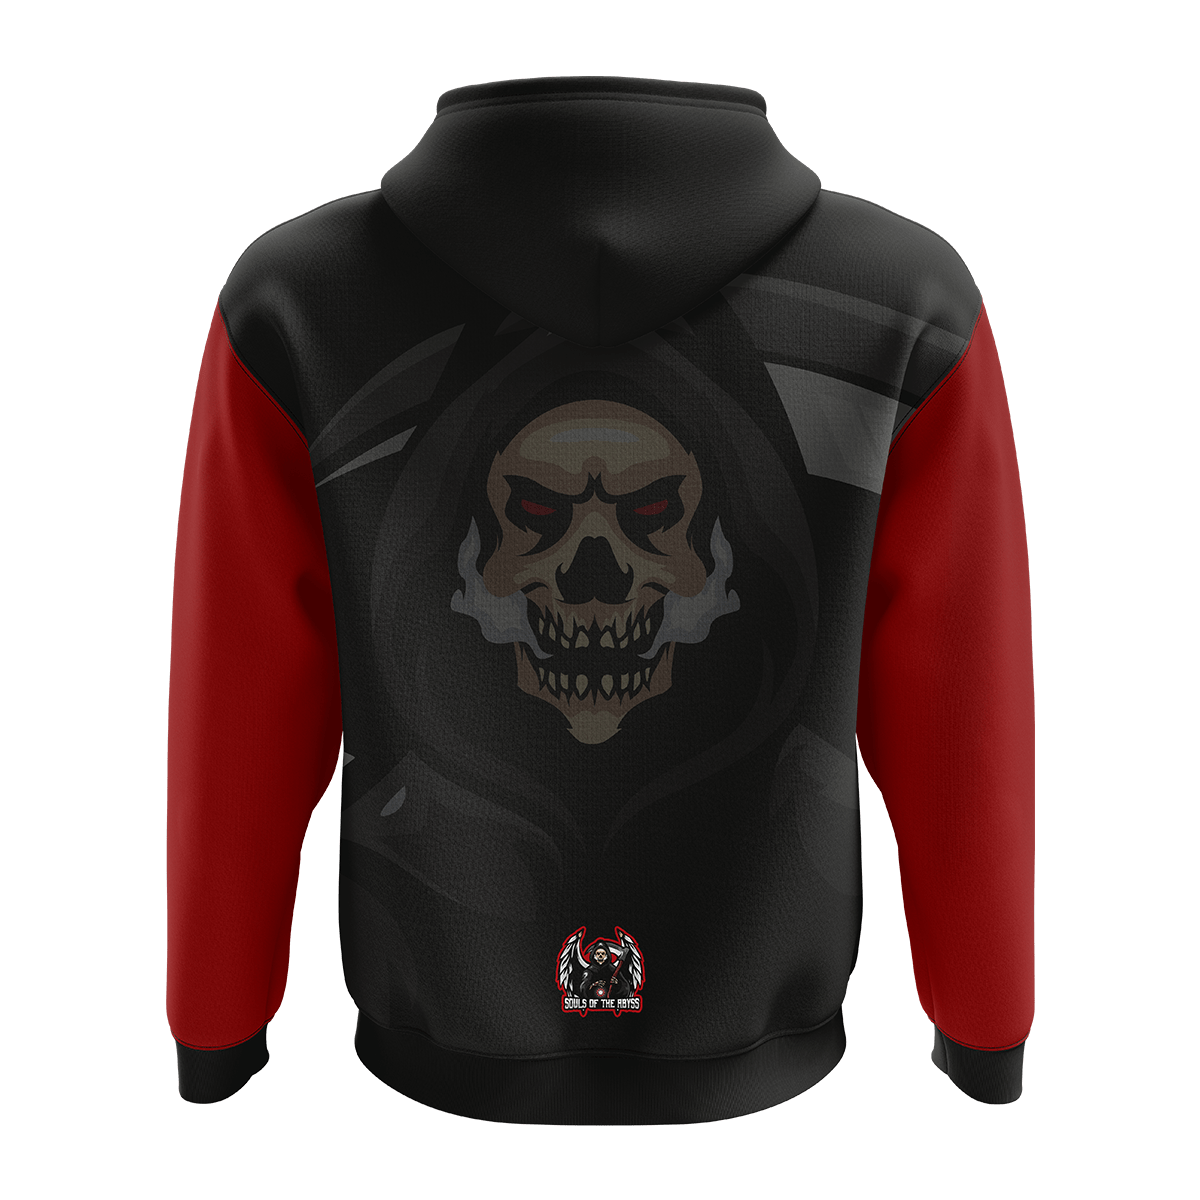 SOULS OF THE ABYSS - Crew Zipper 2021